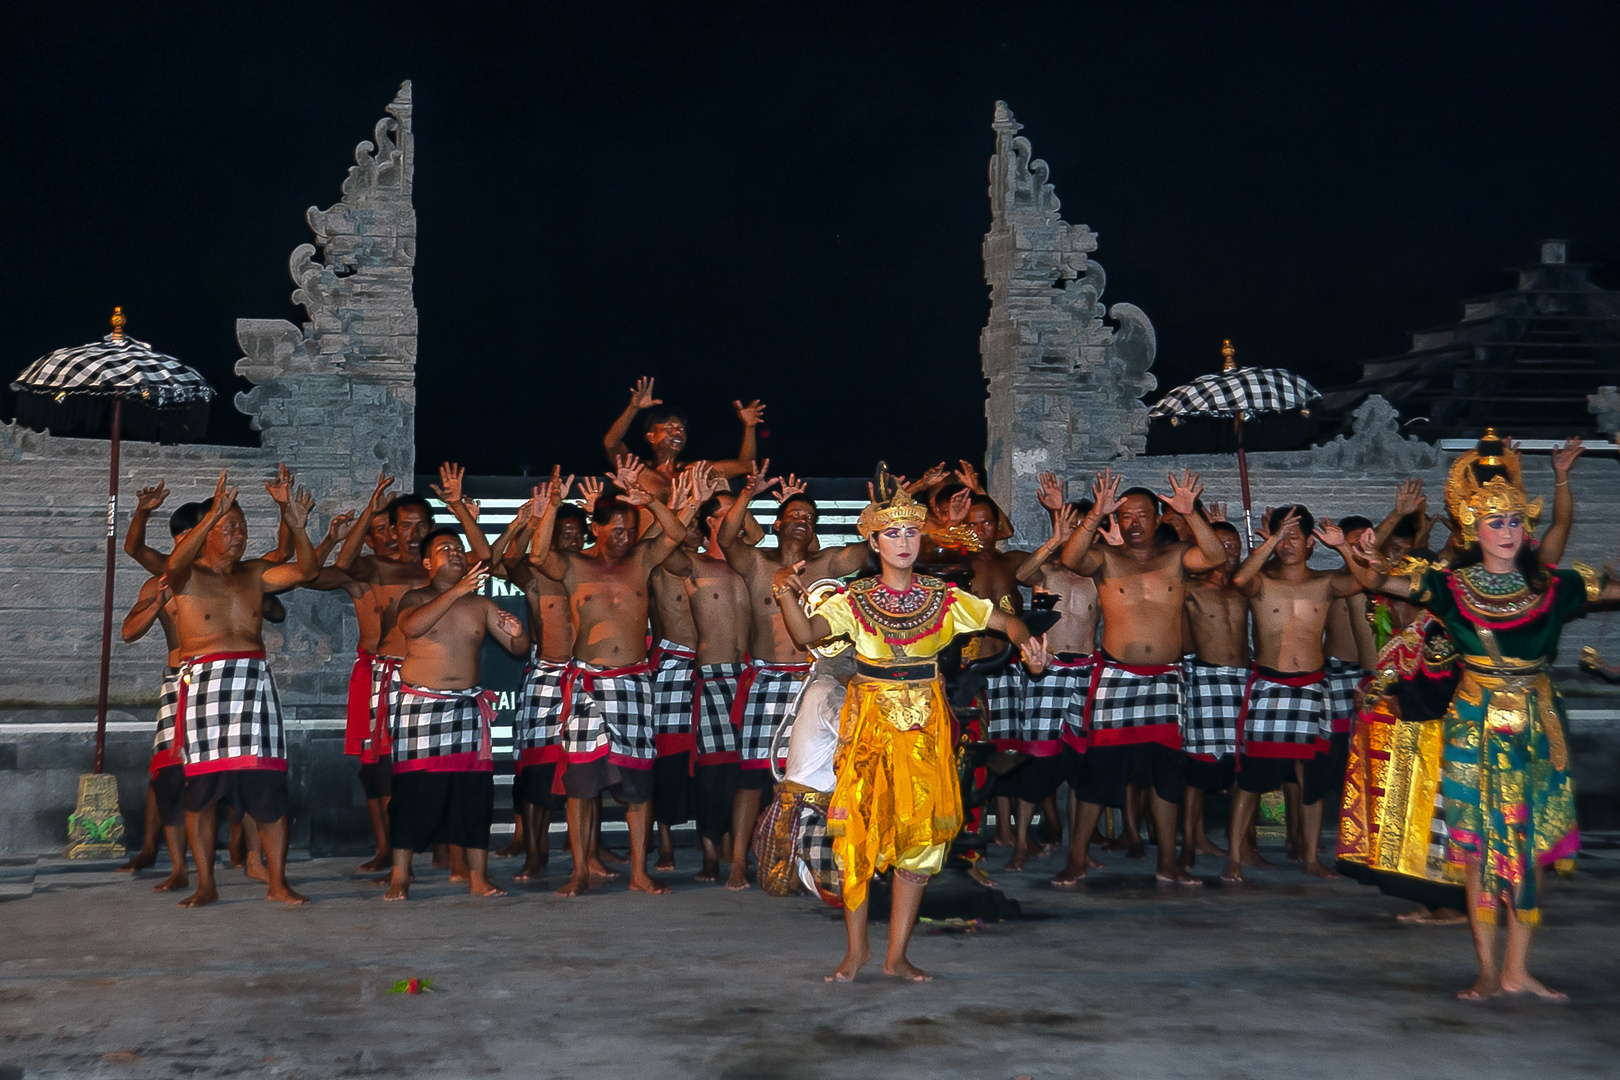 End of the Kecak performance